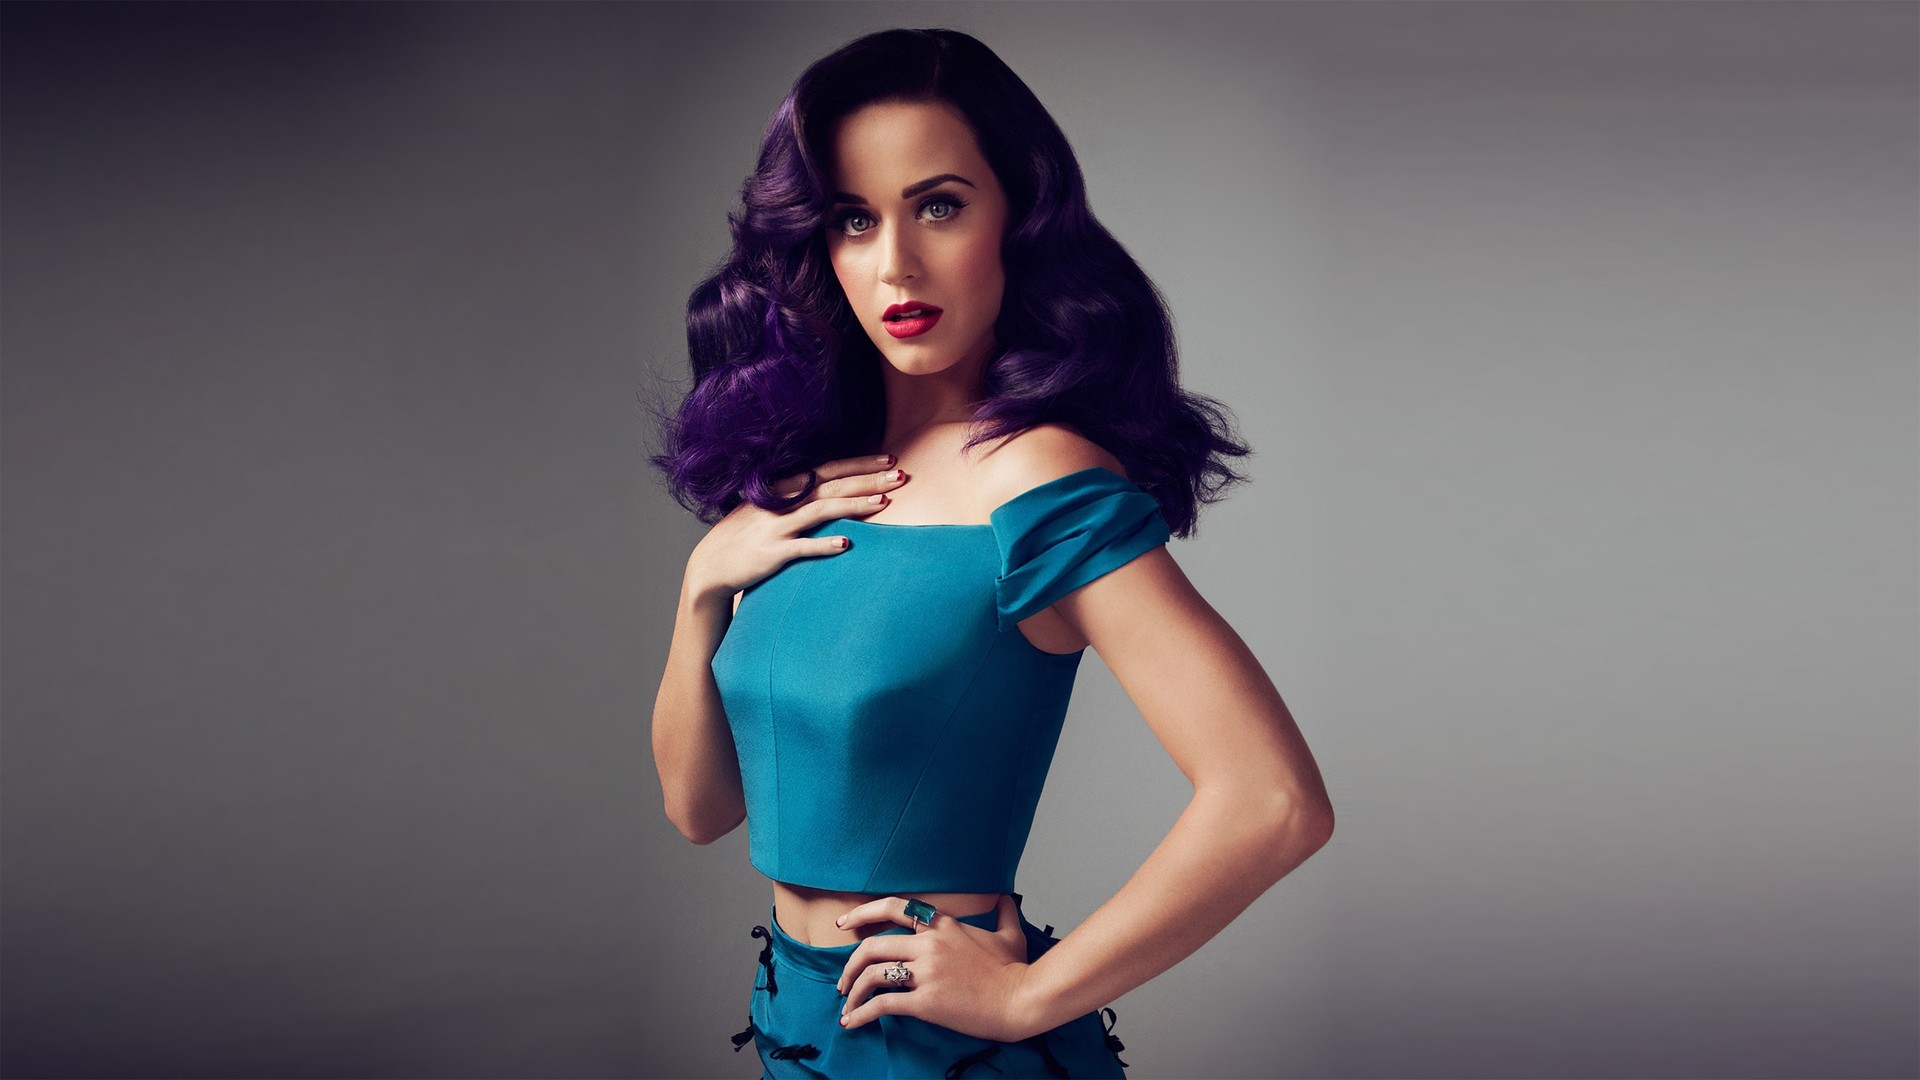 Katy Perry Wallpaper A21